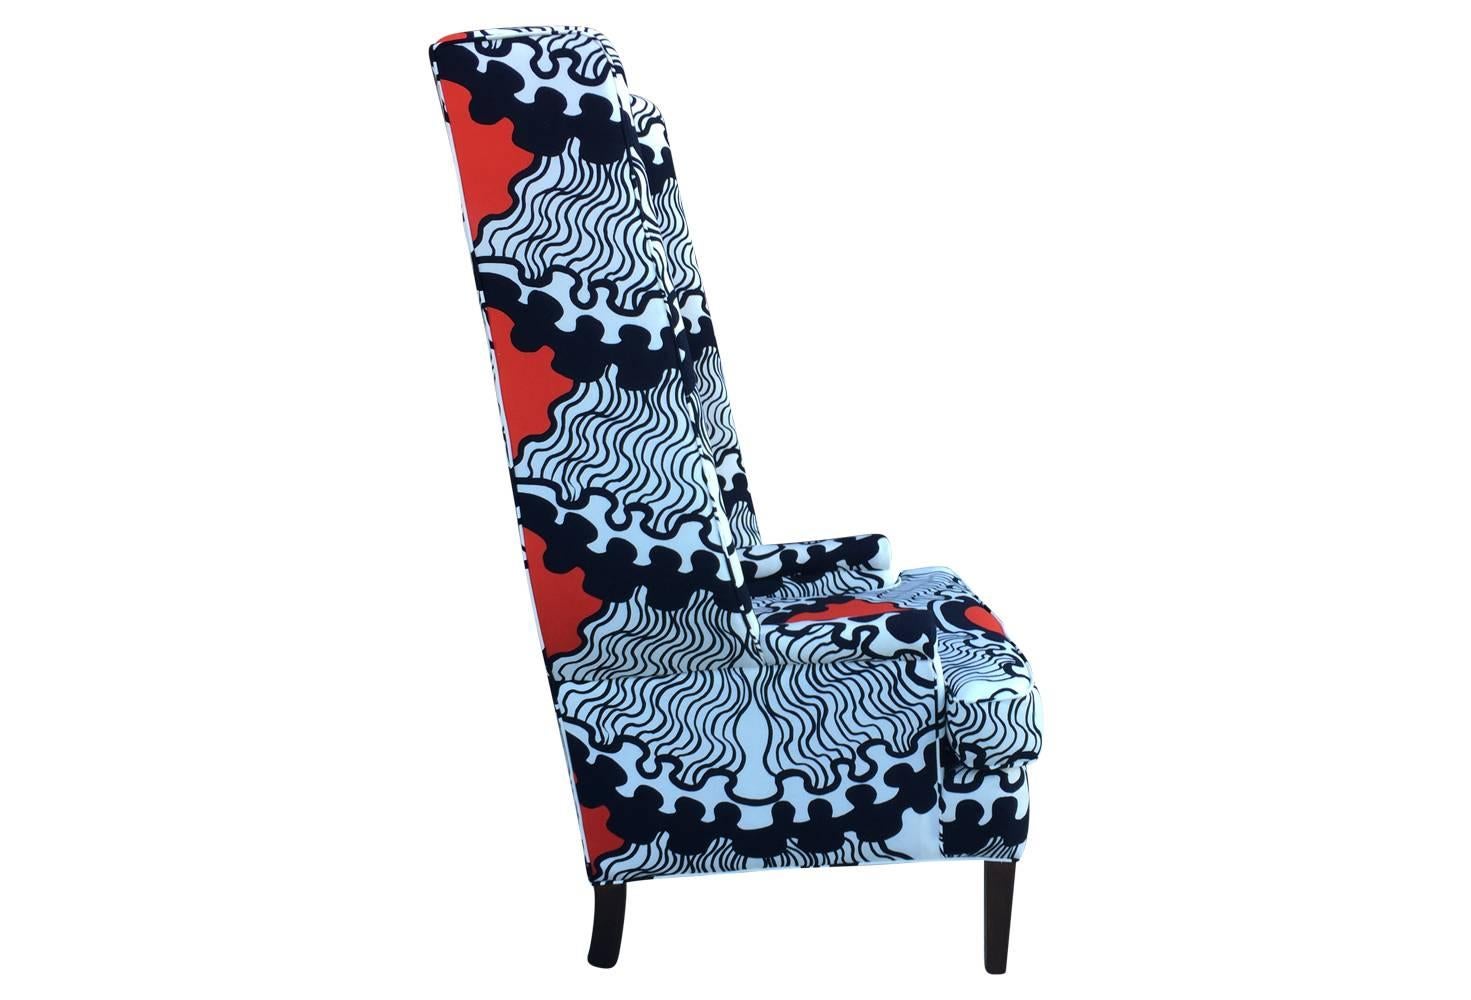 This oversized wingback chair has been completely restored and upholstered in a vintage Mid-Century Modern abstract fabric, with red, white and blue designs. Fabric is reminiscent of the designs of Marimekko. Seat height 19 and depth 17.